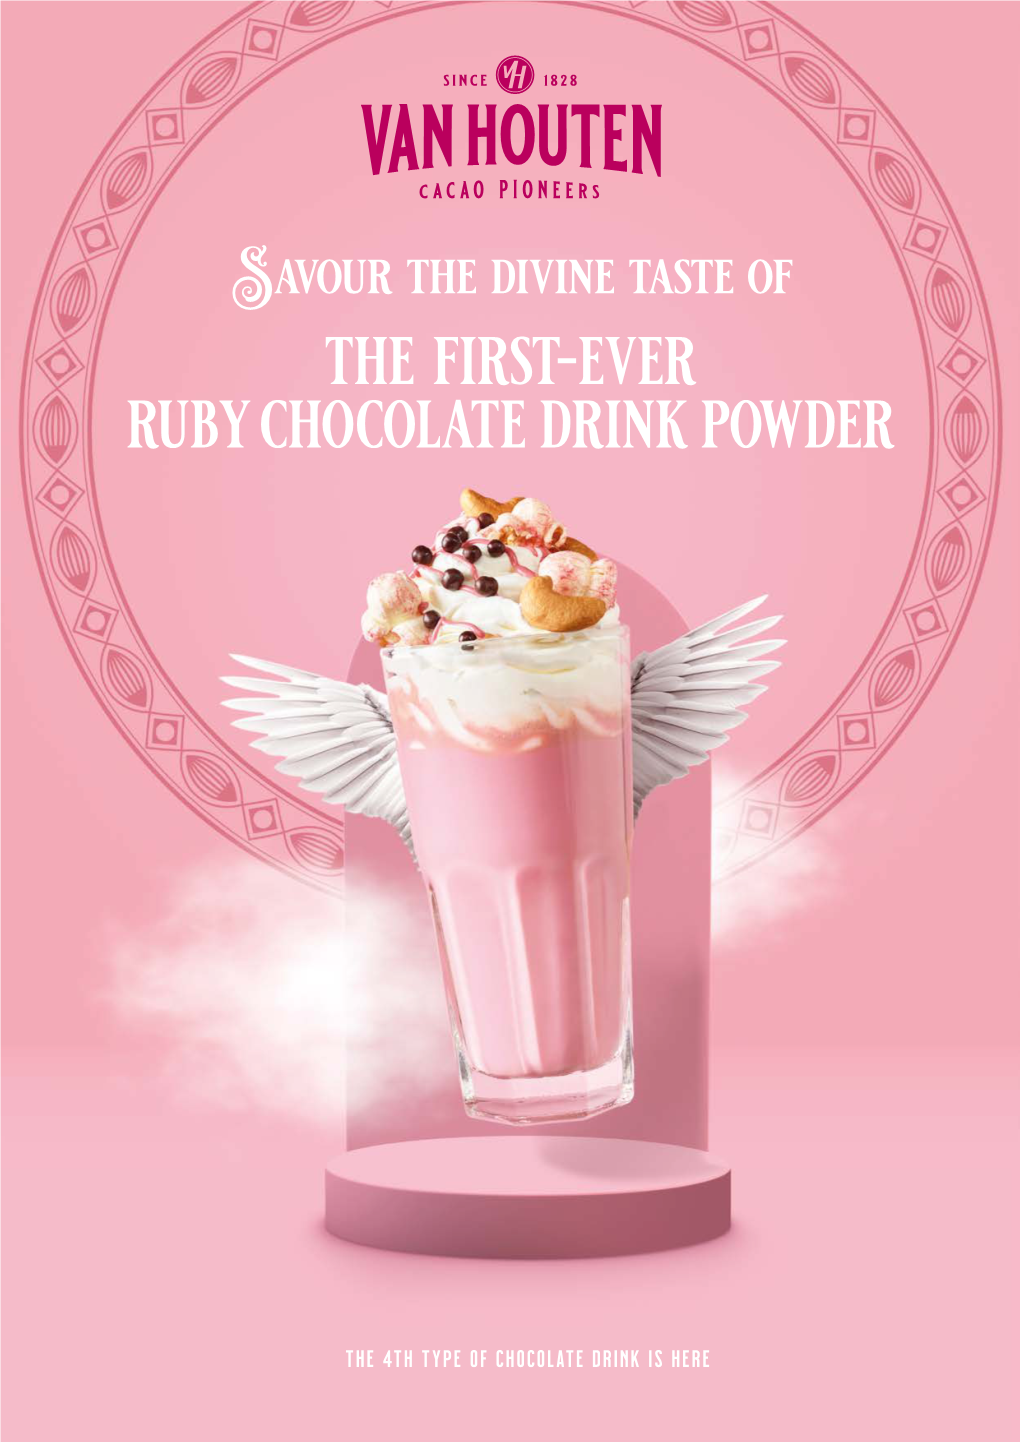 The First-Ever Ruby Chocolate Drink Powder